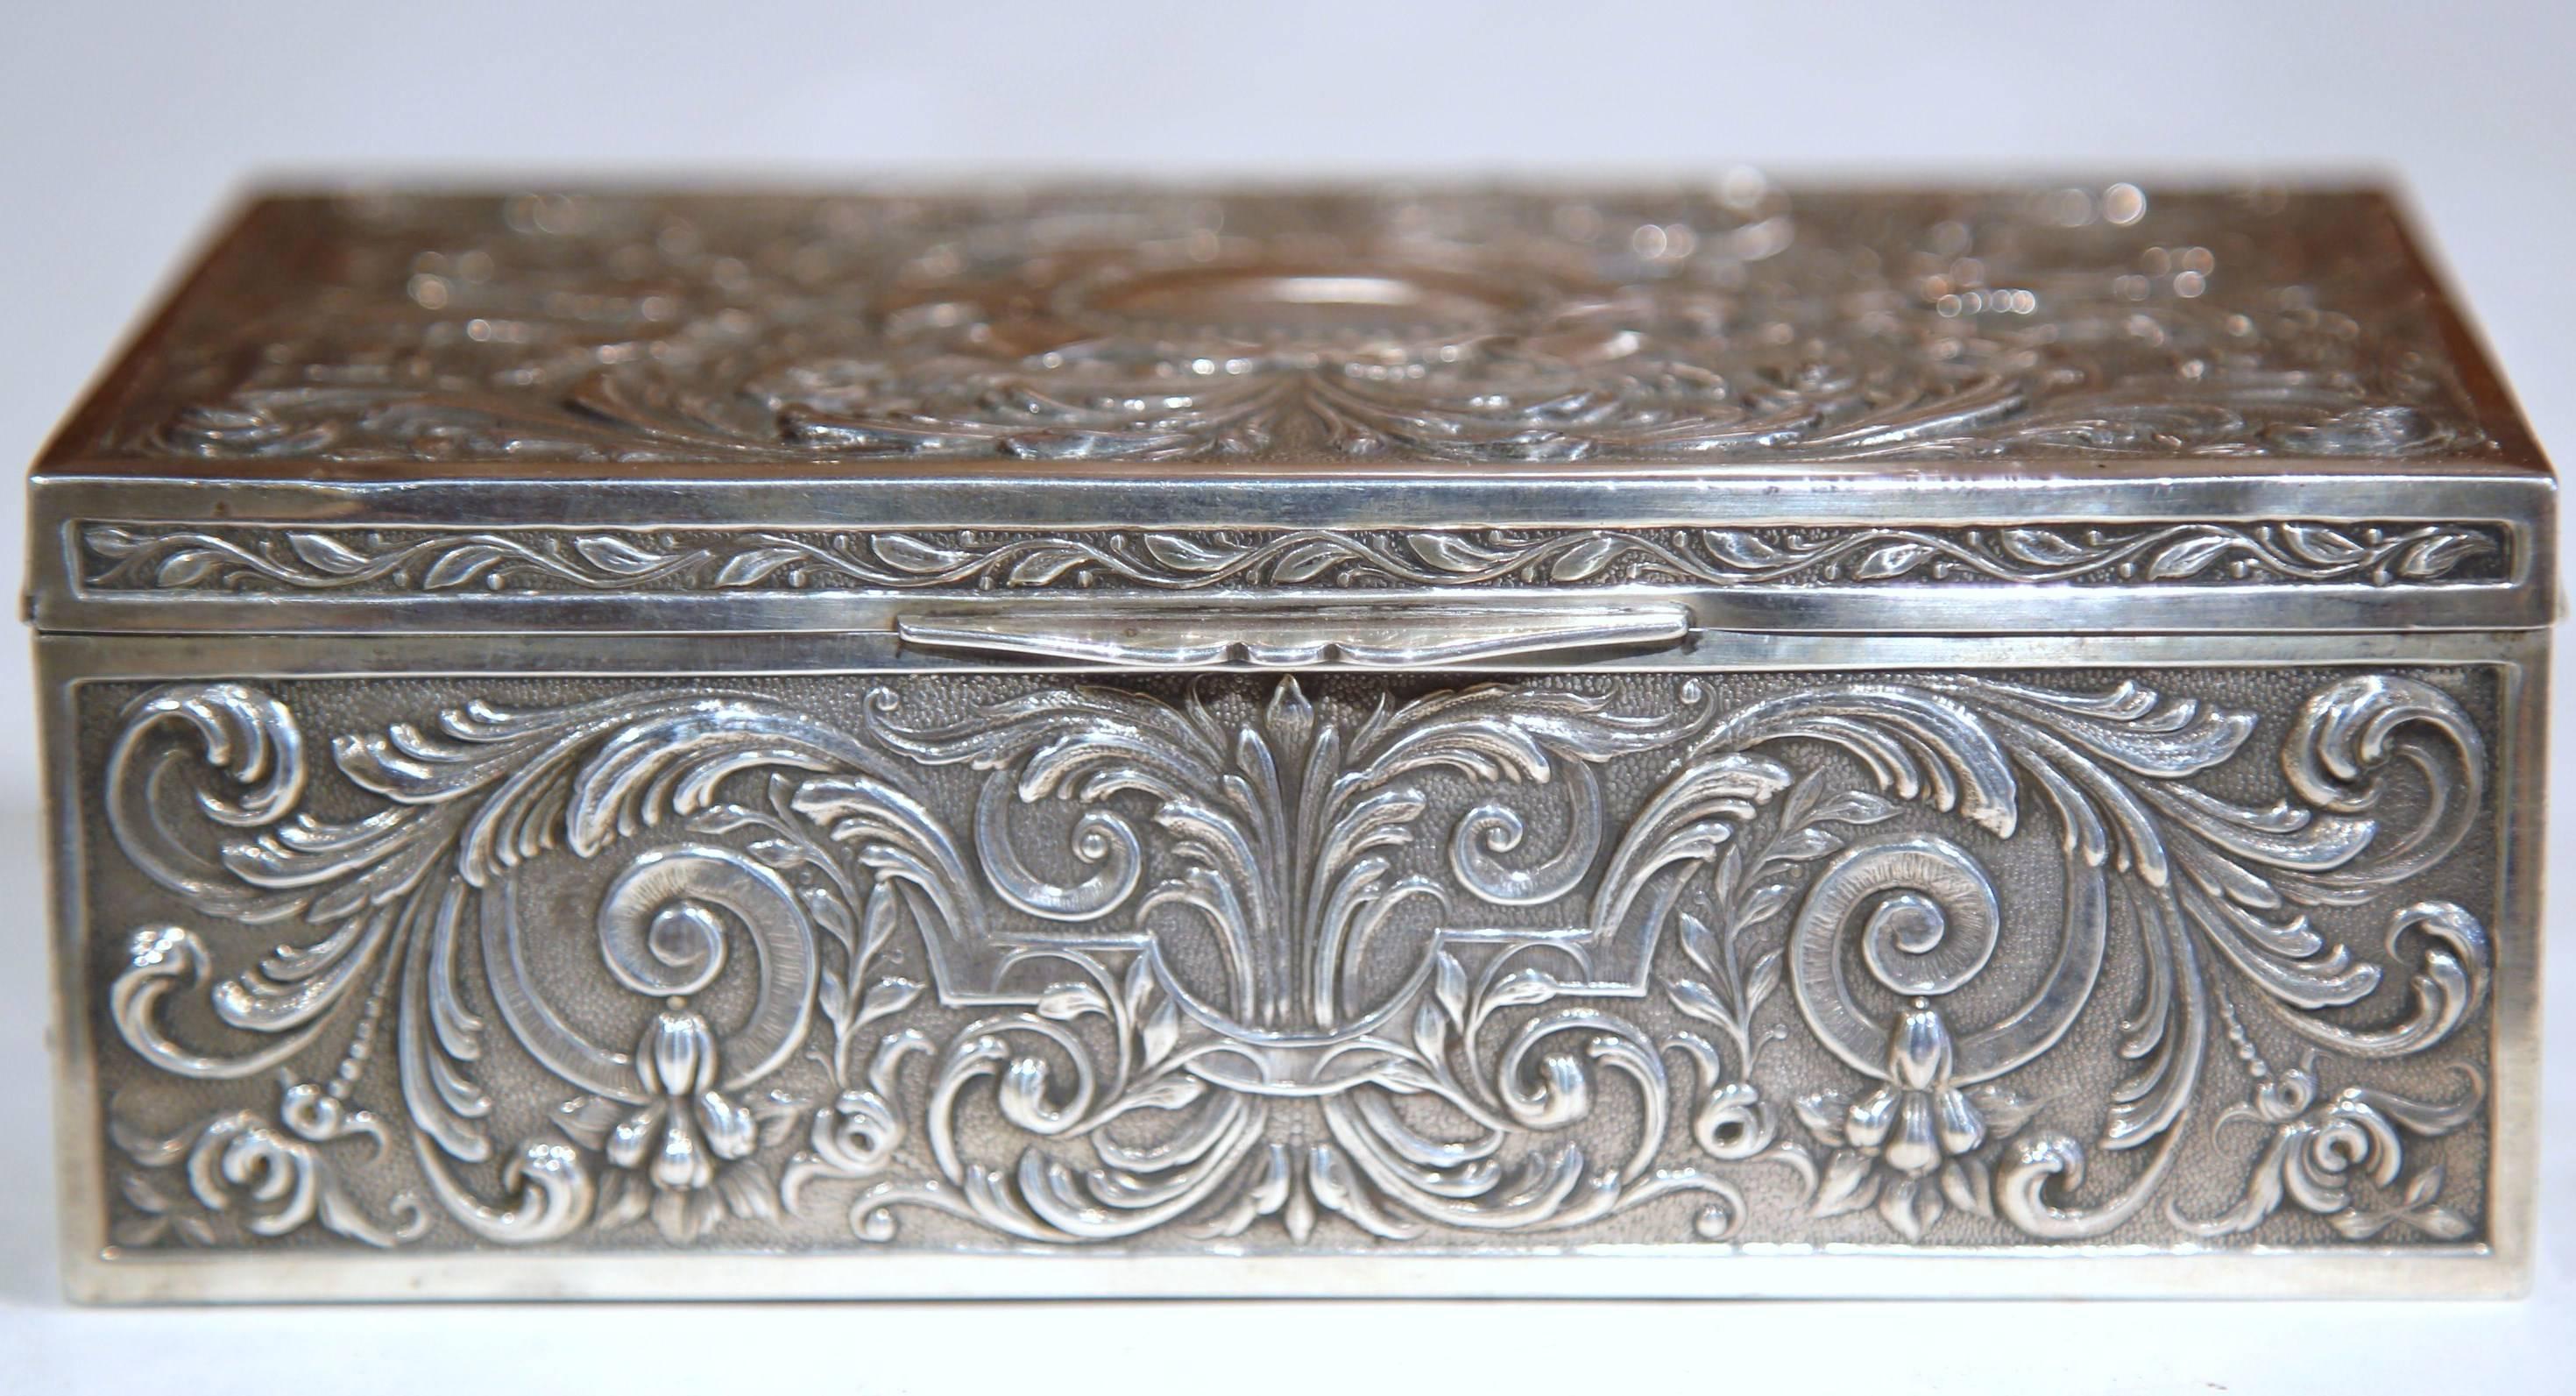 This small wooden and silver-plated jewelry box was crafted in France, circa 1890. The rectangular box is embellished with intricate repousse designs on the exterior and has a raw wood finish on the inside. The box is in excellent condition with